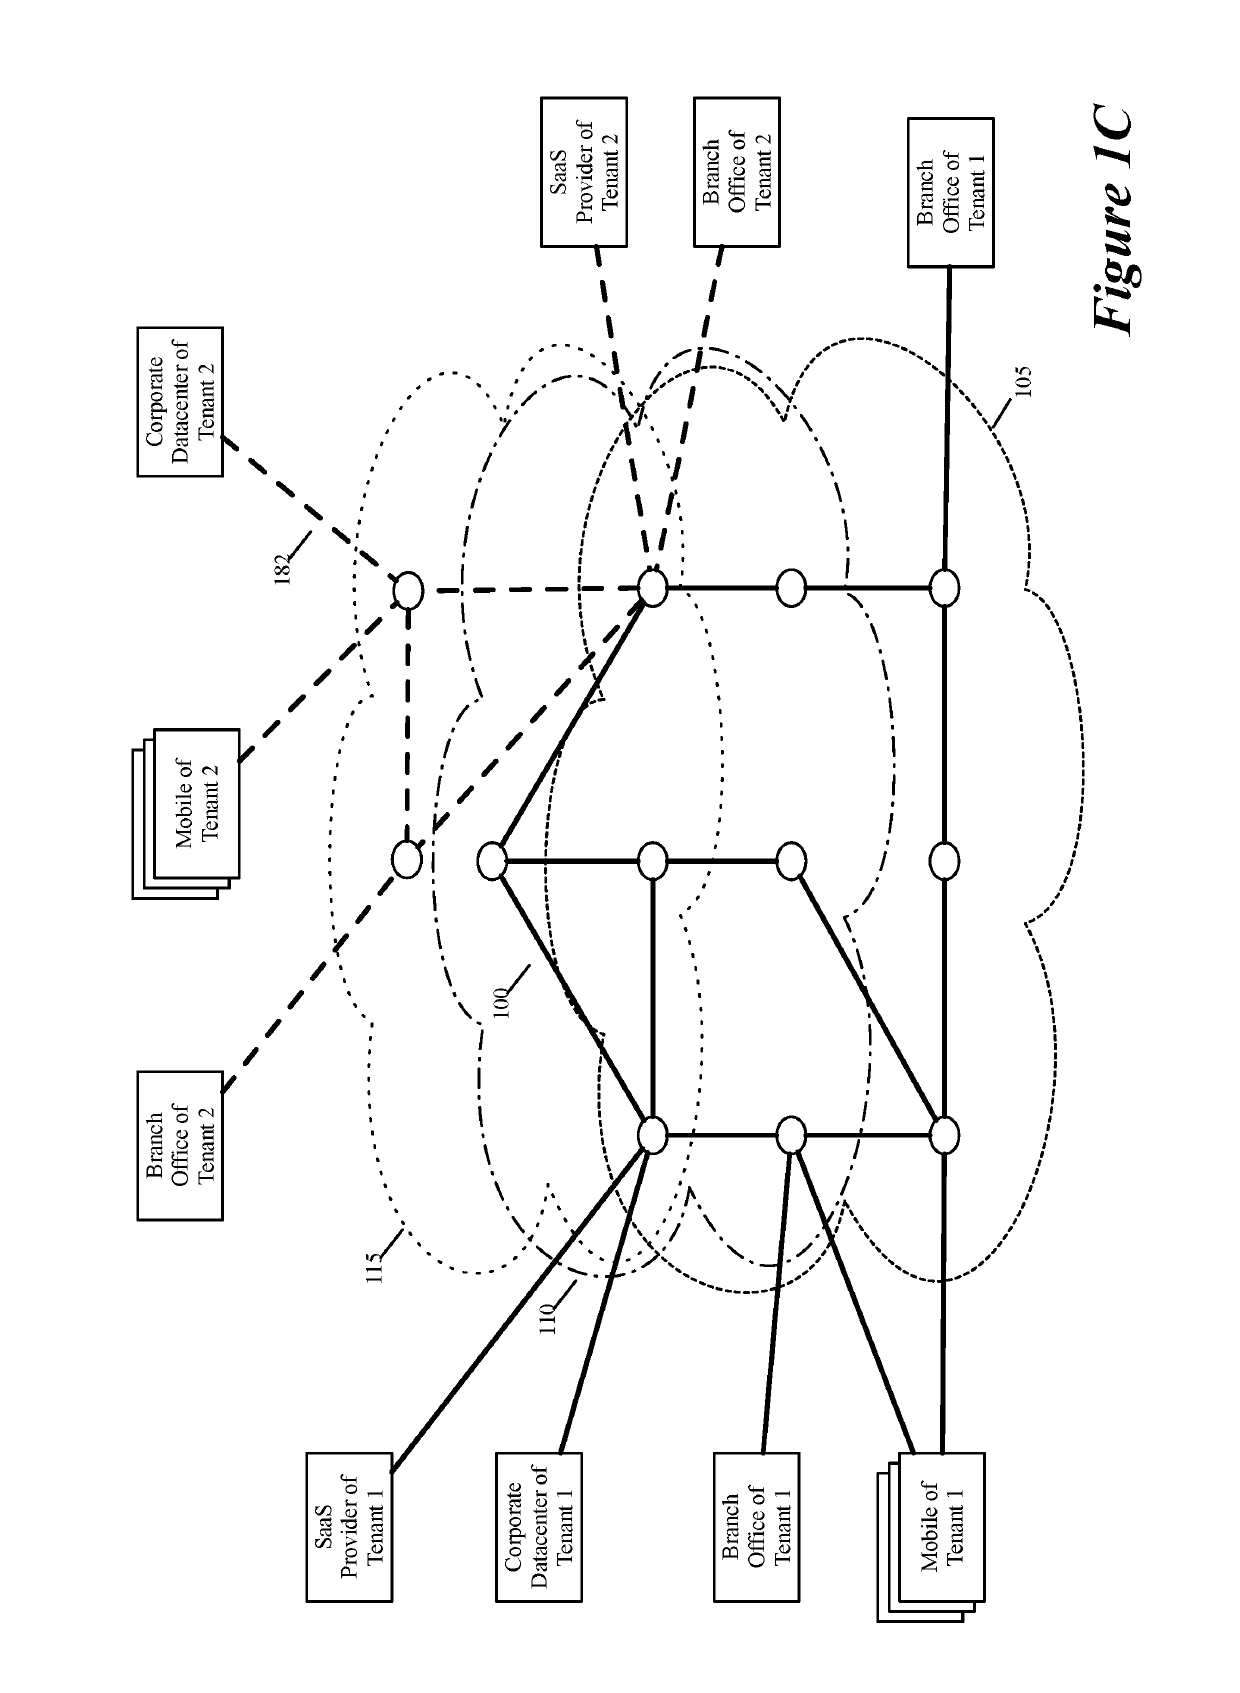 Identifying multiple nodes in a virtual network defined over a set of public clouds to connect to an external saas provider